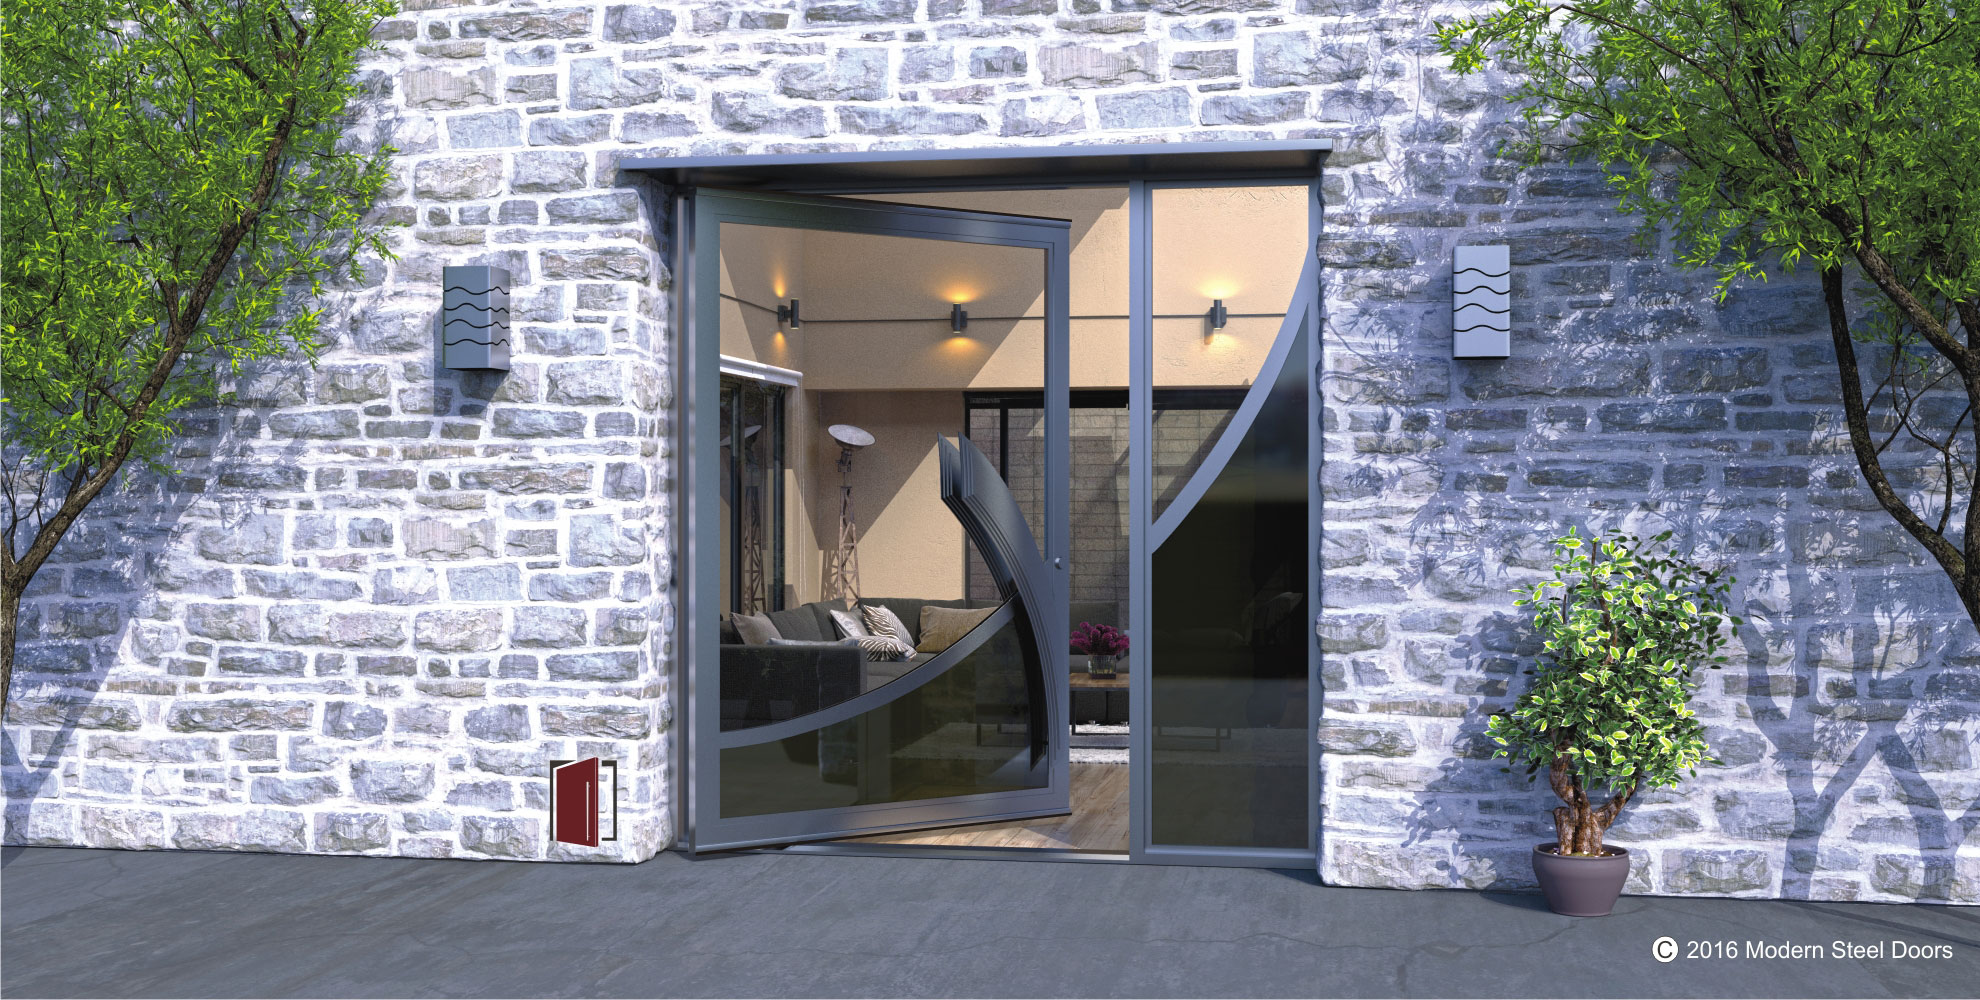 large single pivot door wave design made of clear and tinted glass with gray curved door handles and matching sidelight